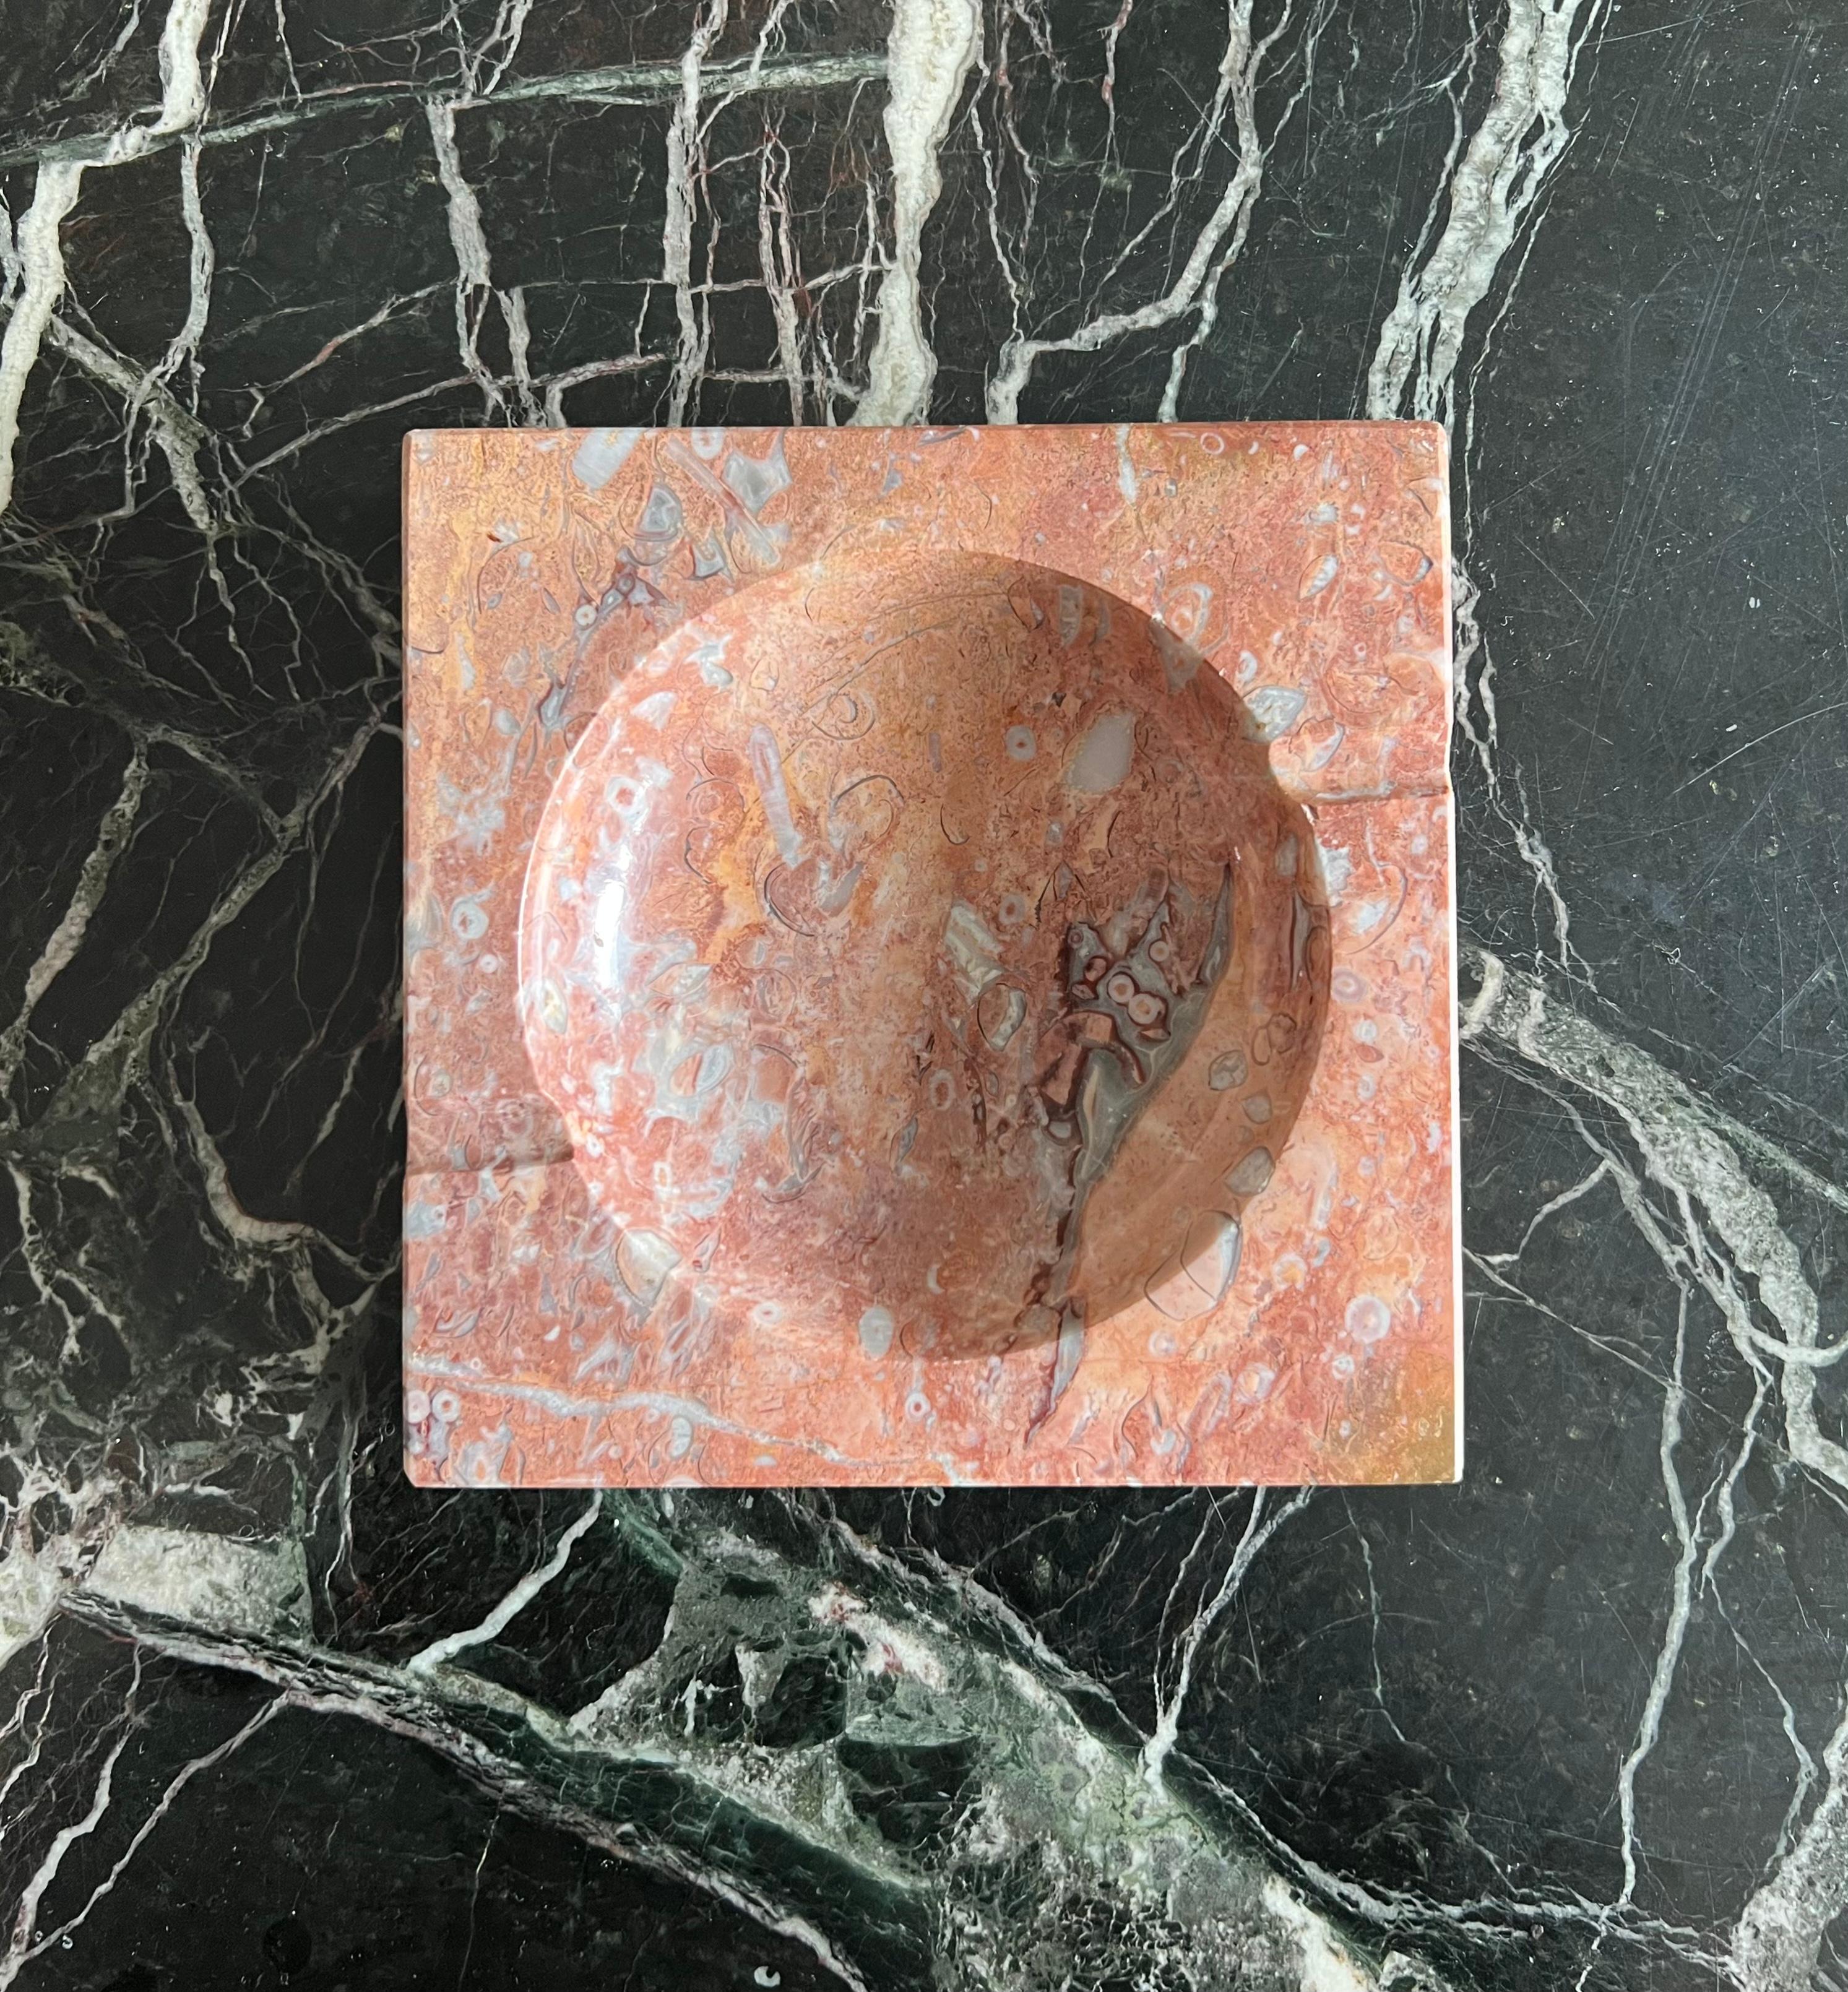 A large vintage marble ashtray, 1960s. Tones of rose, flesh, and fog. Made in Pakistan. Flawless. Pick up in Los Angeles or worldwide shipping available.
Dimensions: 7.25” x 7.25” x 1.75”.